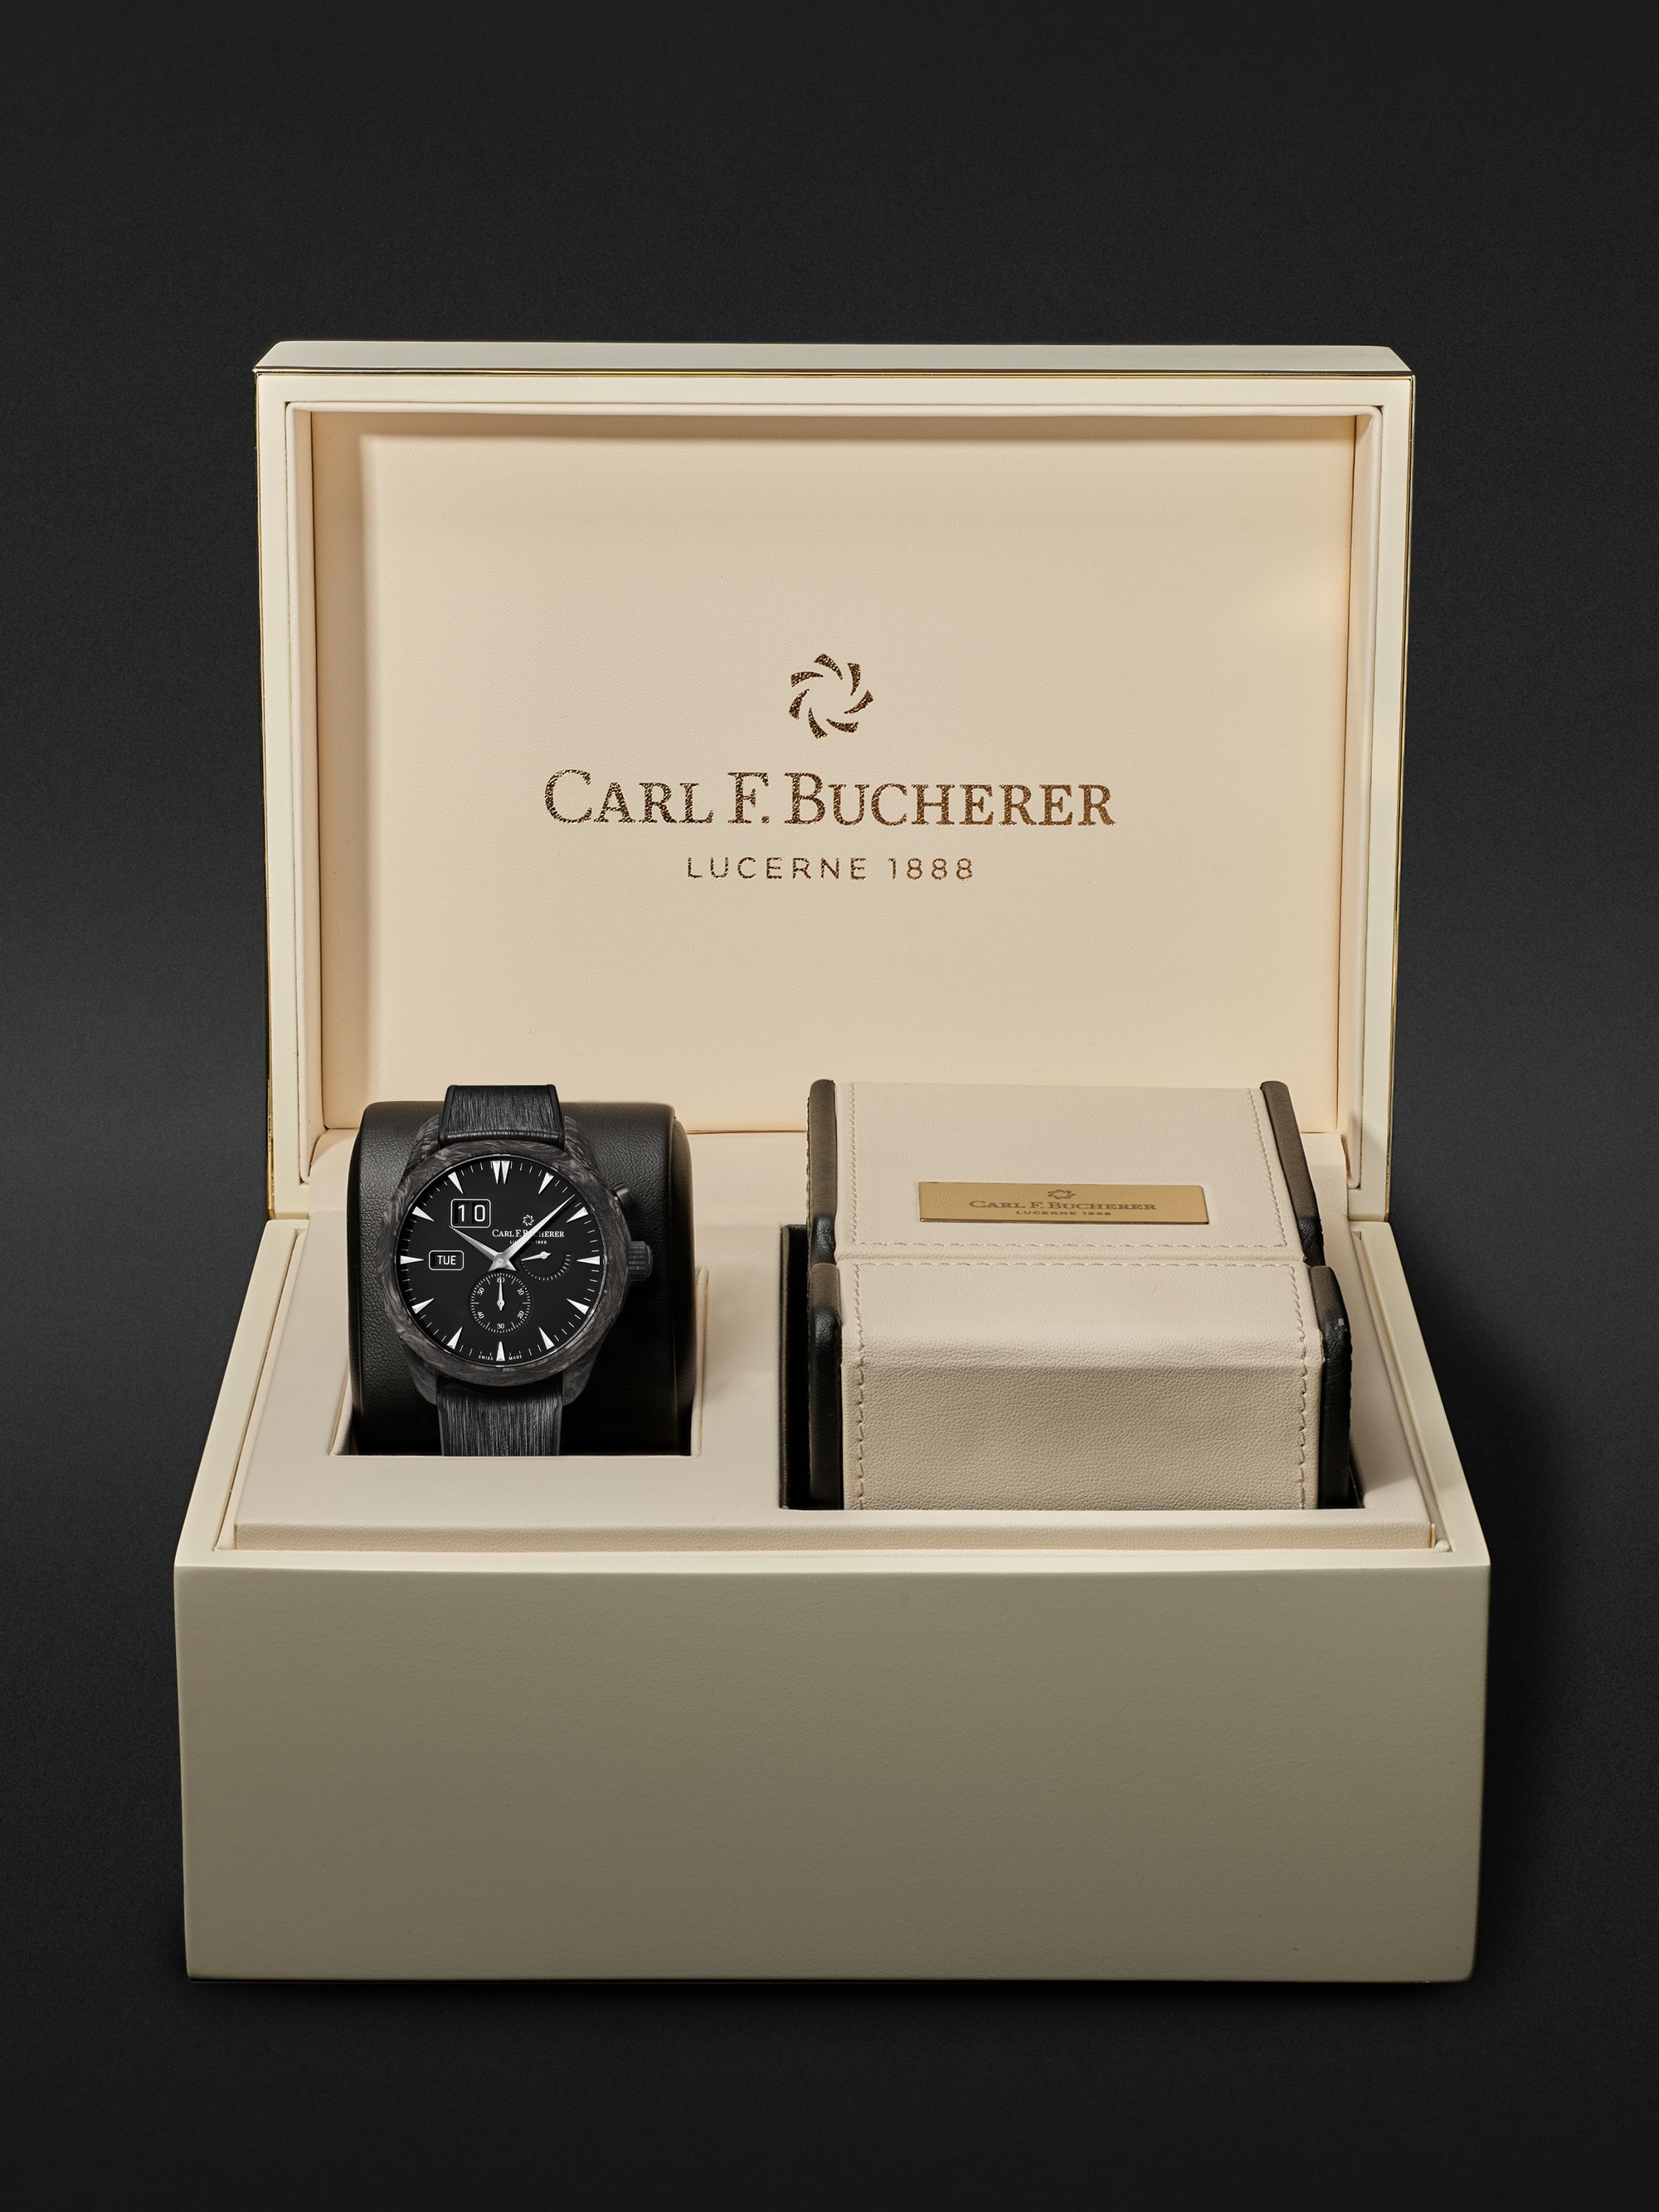 CARL F. BUCHERER Manero Peripheral BigDate Limited Edition Automatic 41.6mm Carbon Fibre and Rubber Watch, Ref. No. 00.10926.16.33.01